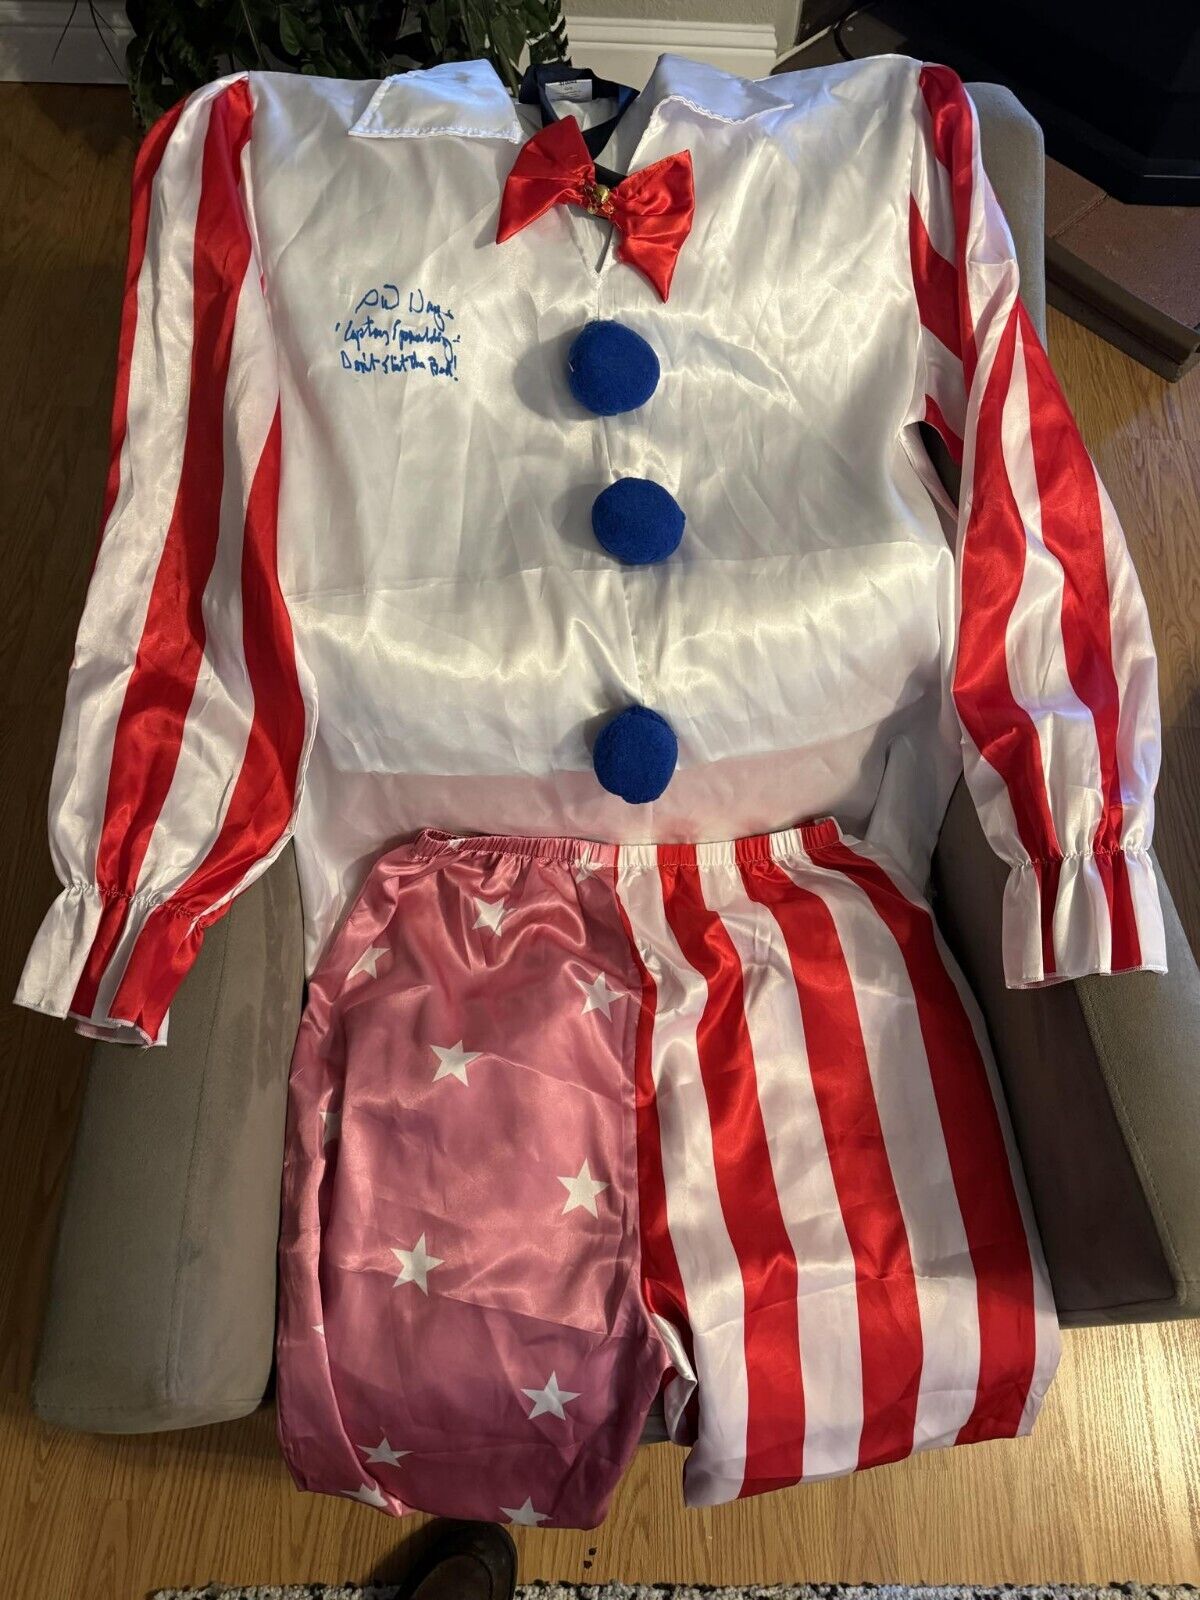 Sid Haig Signed Genuine Costume House of 1000 Corpses Captain Spaulding 🤡  